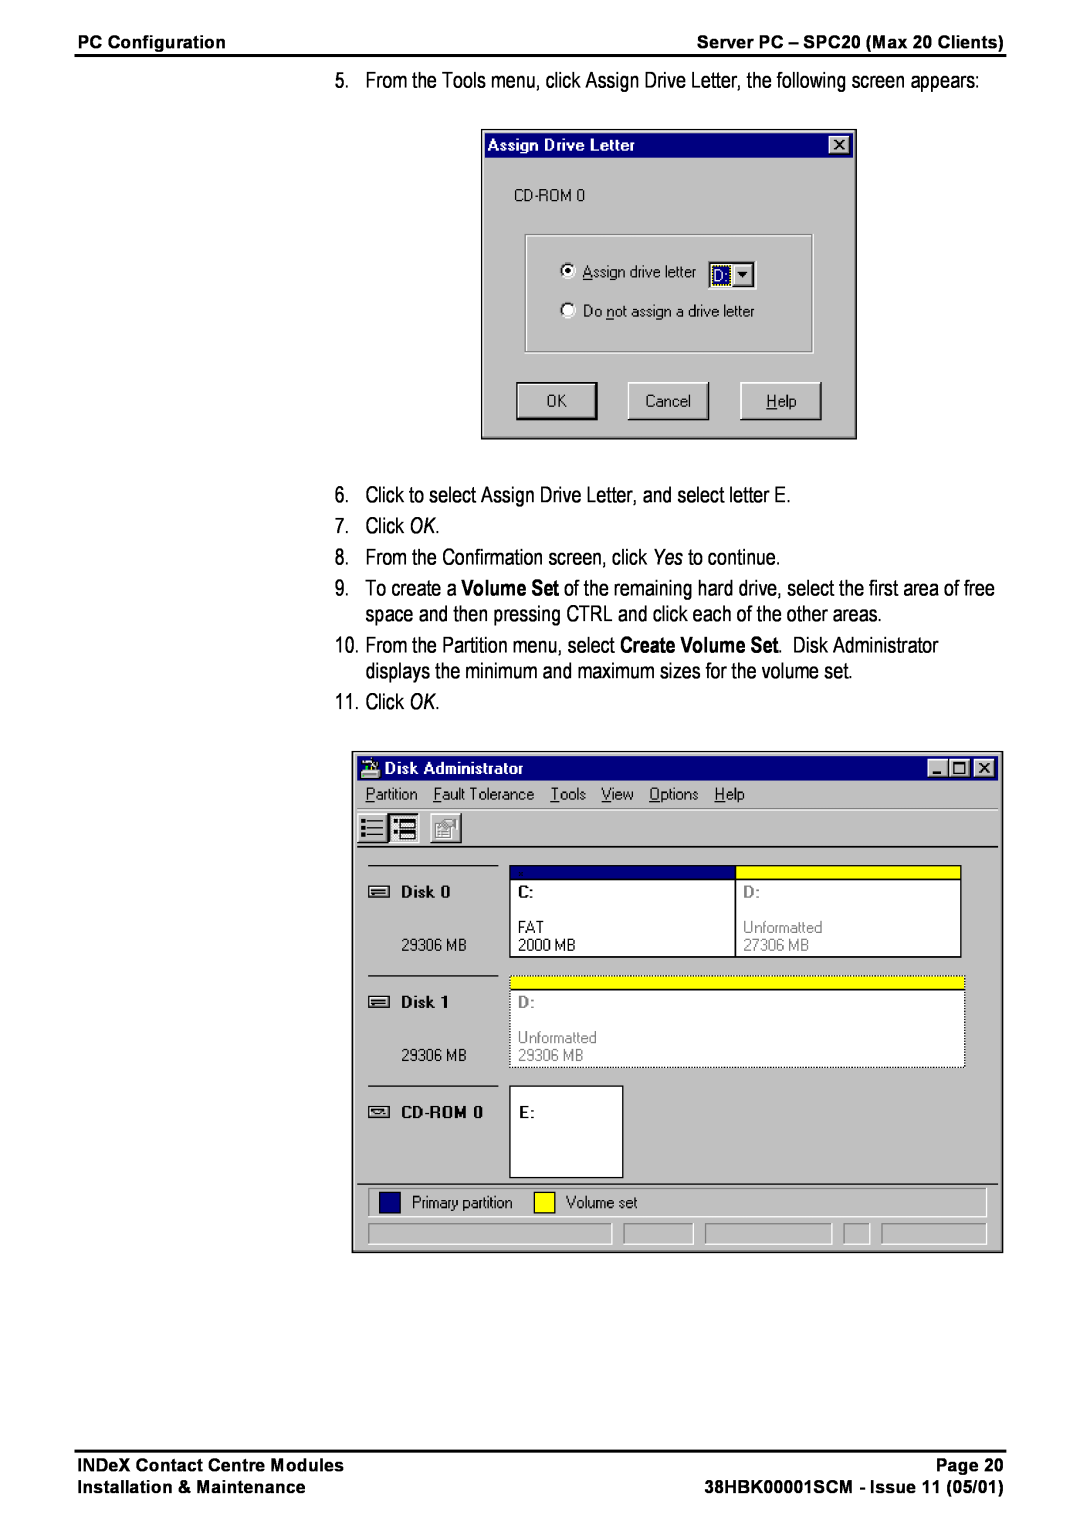 Avaya 38HBK00001SCM manual Click to select Assign Drive Letter, and select letter E, Click OK 